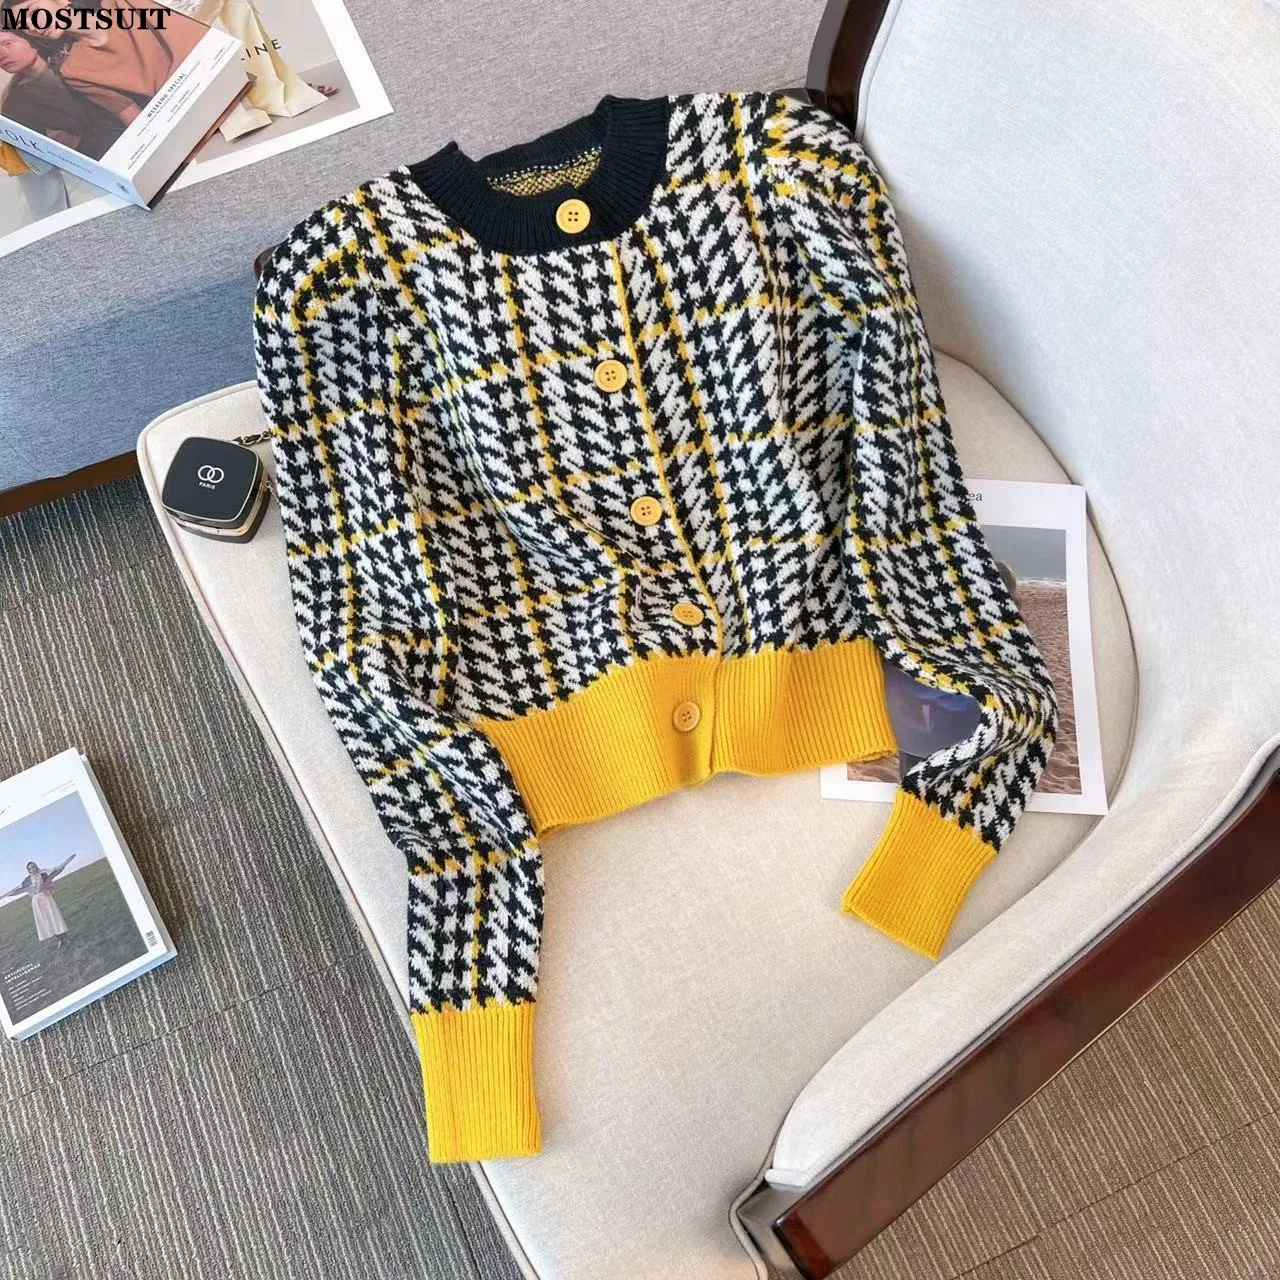 

Houndstooth Knitted Sweater Cardigan Women Korean Vintage Contrast Color Knitwear Long Sleeve O-neck Chic Ladies Jumper Top 2022